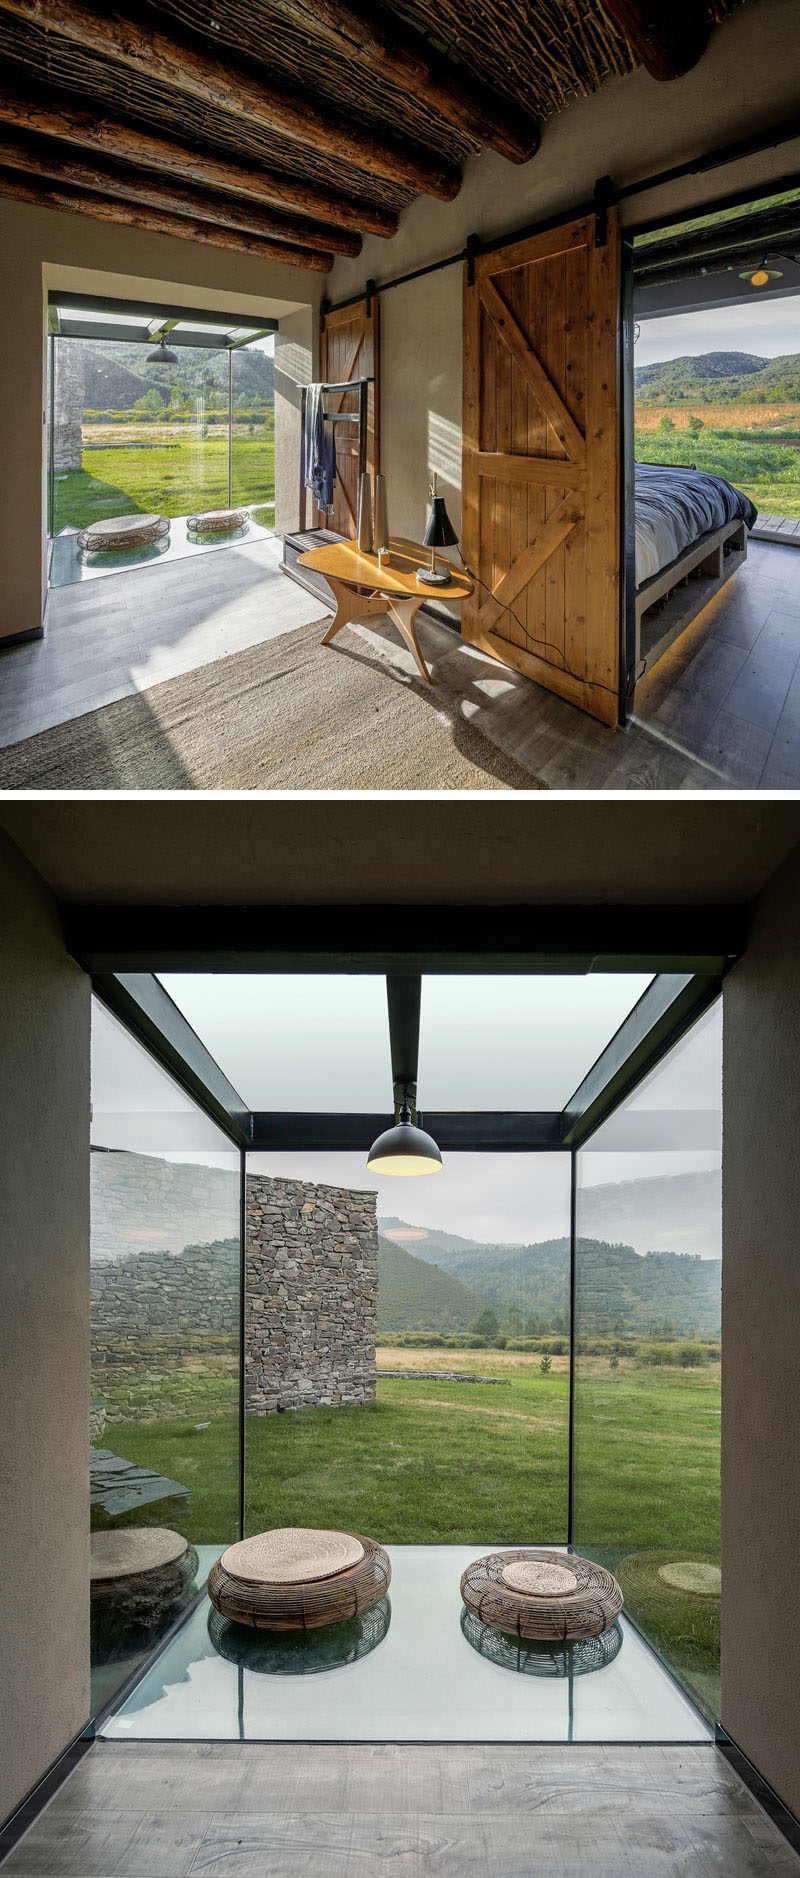 A window becomes a sitting area in this visitors centre in China. #Window #SittingArea